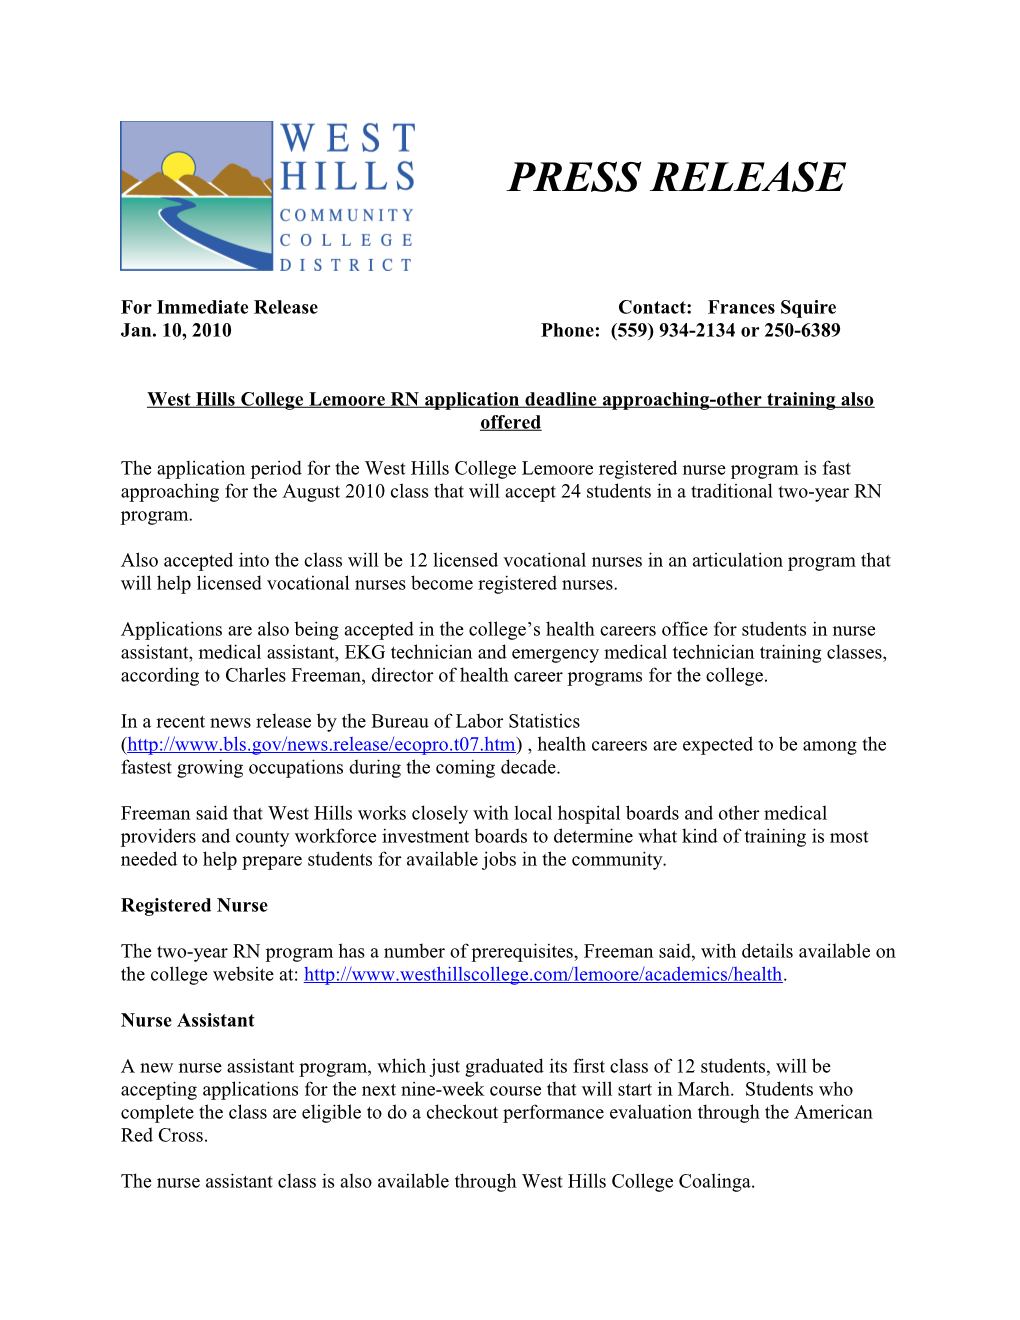 West Hills College Lemoore RN Application Deadline Approaching-Other Trainings Also Offered